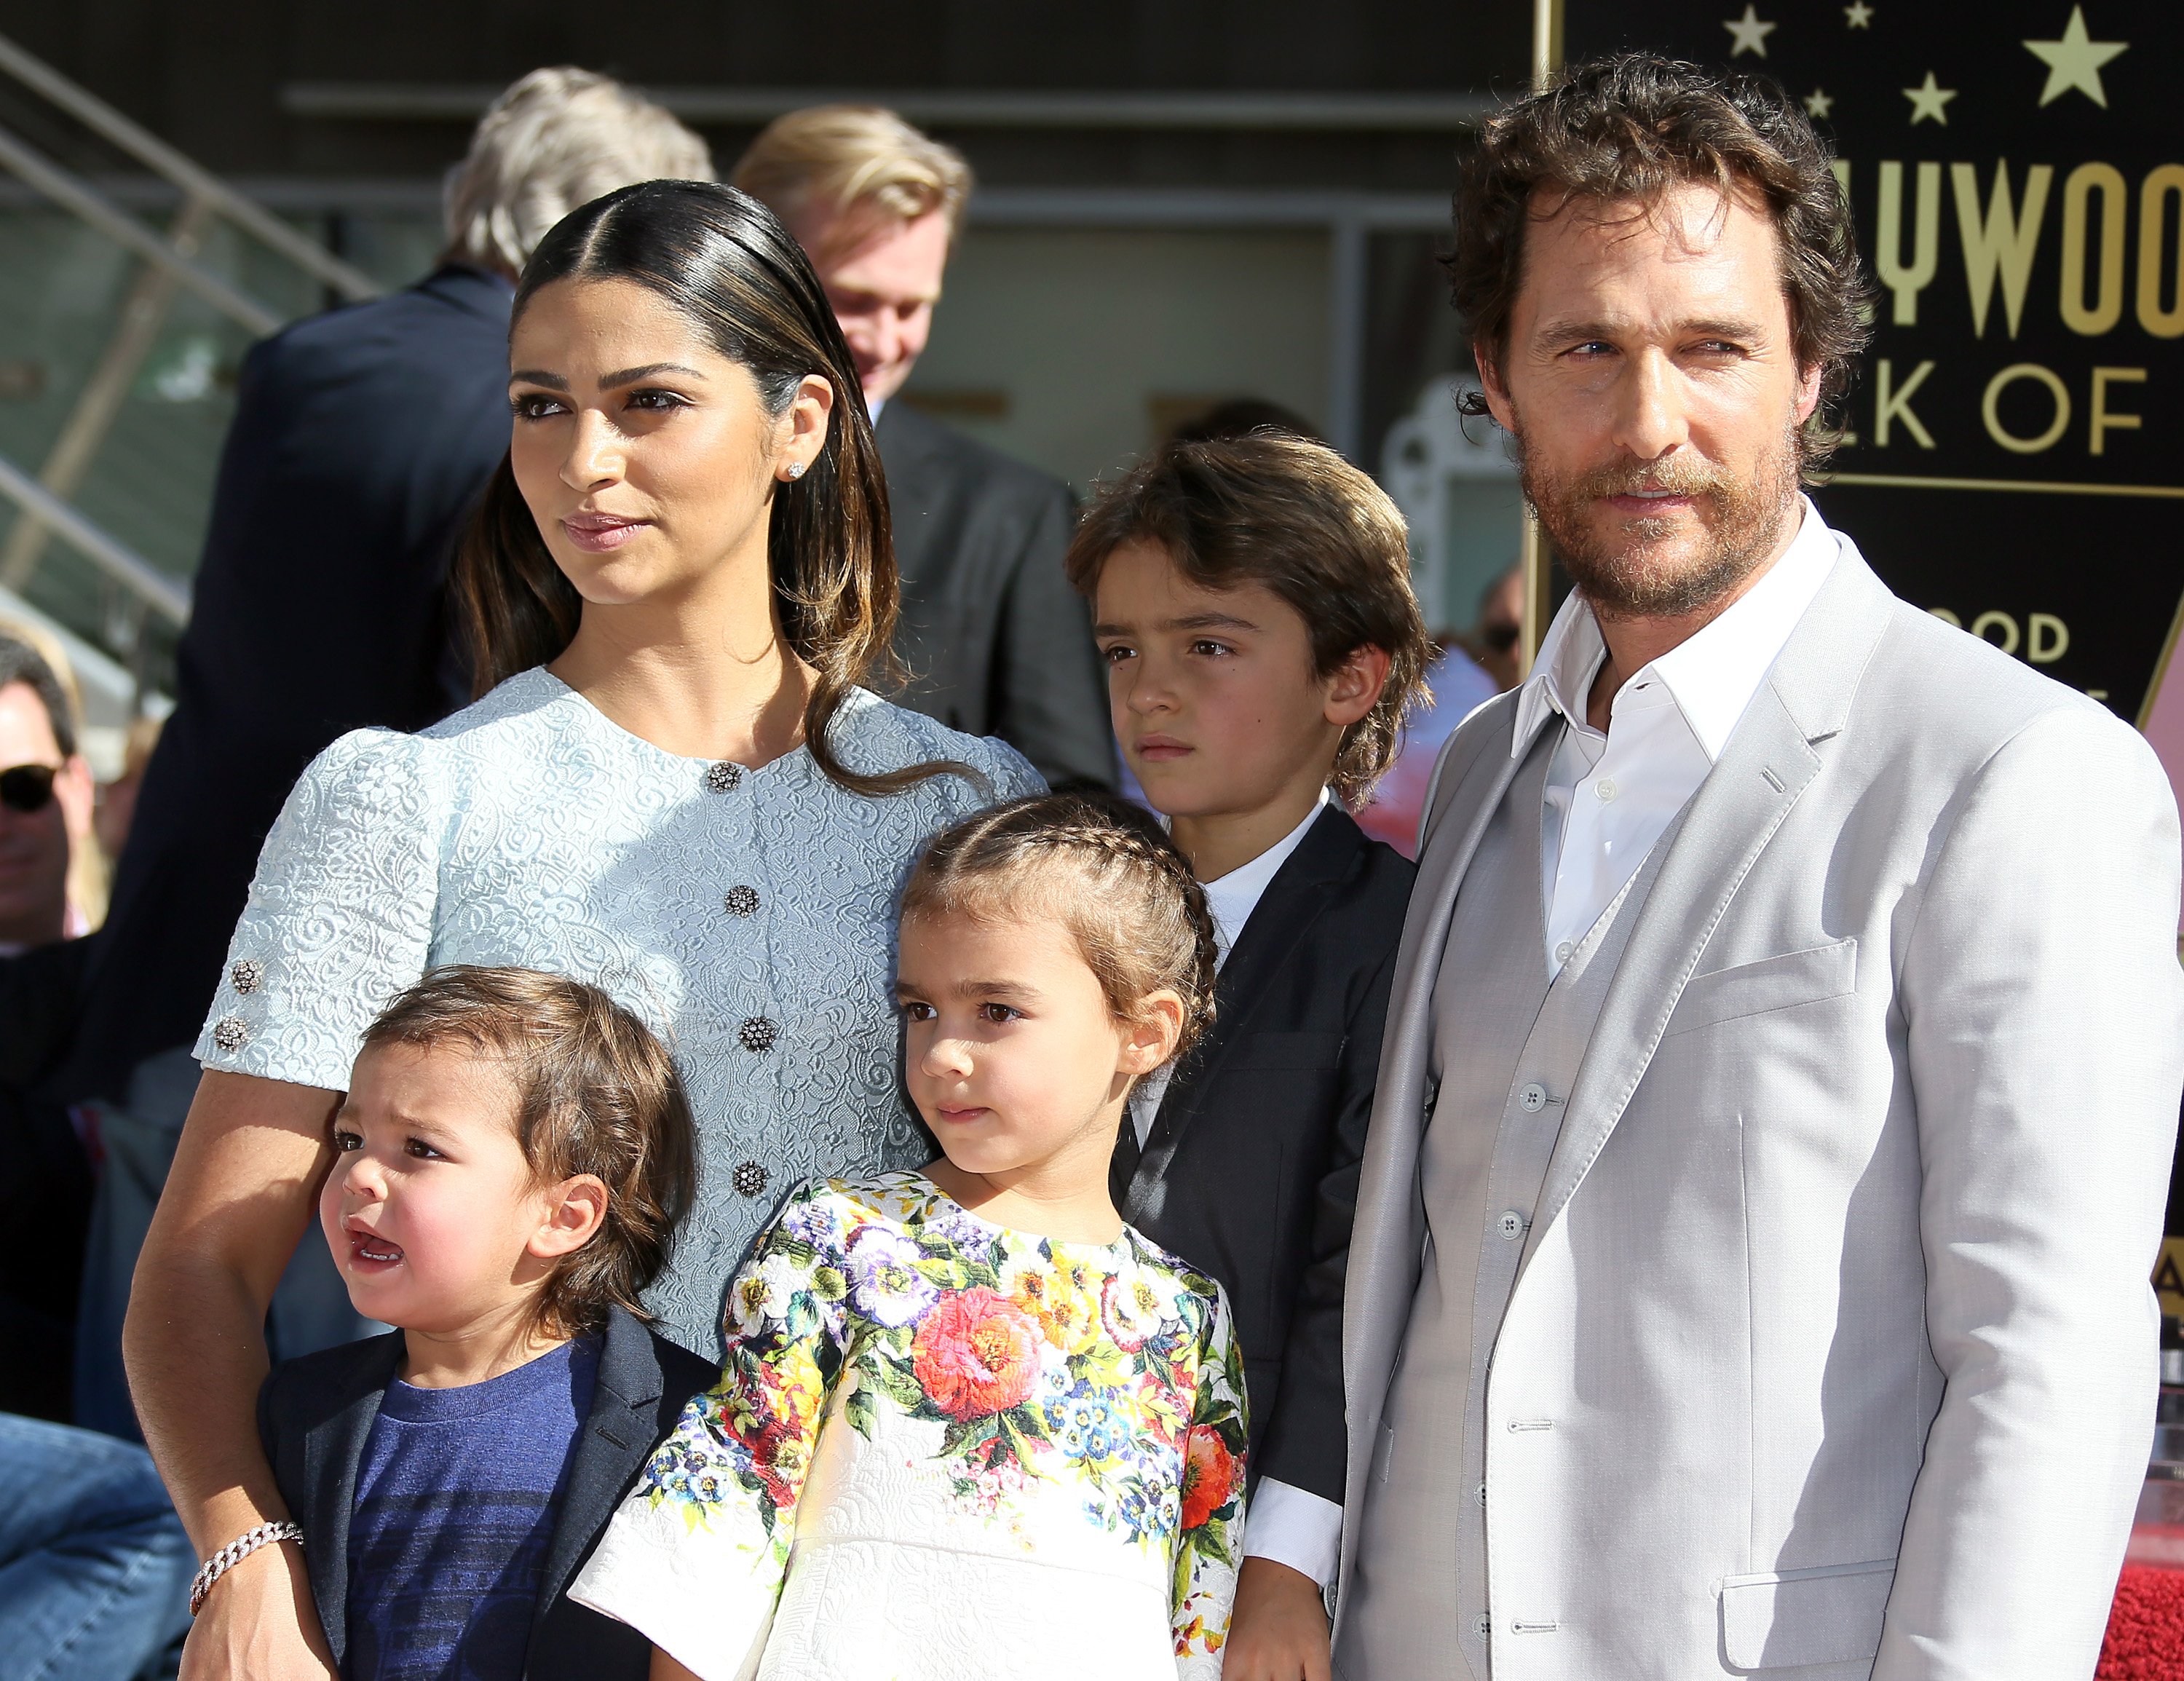 Camila Alves, Levi McConaughey, Livingston McConaughey and Vida McConaughey attend The Hollywood Walk Of Fame ceremony for Matthew McConaughey on November 17, 2014 | Source: Getty Images